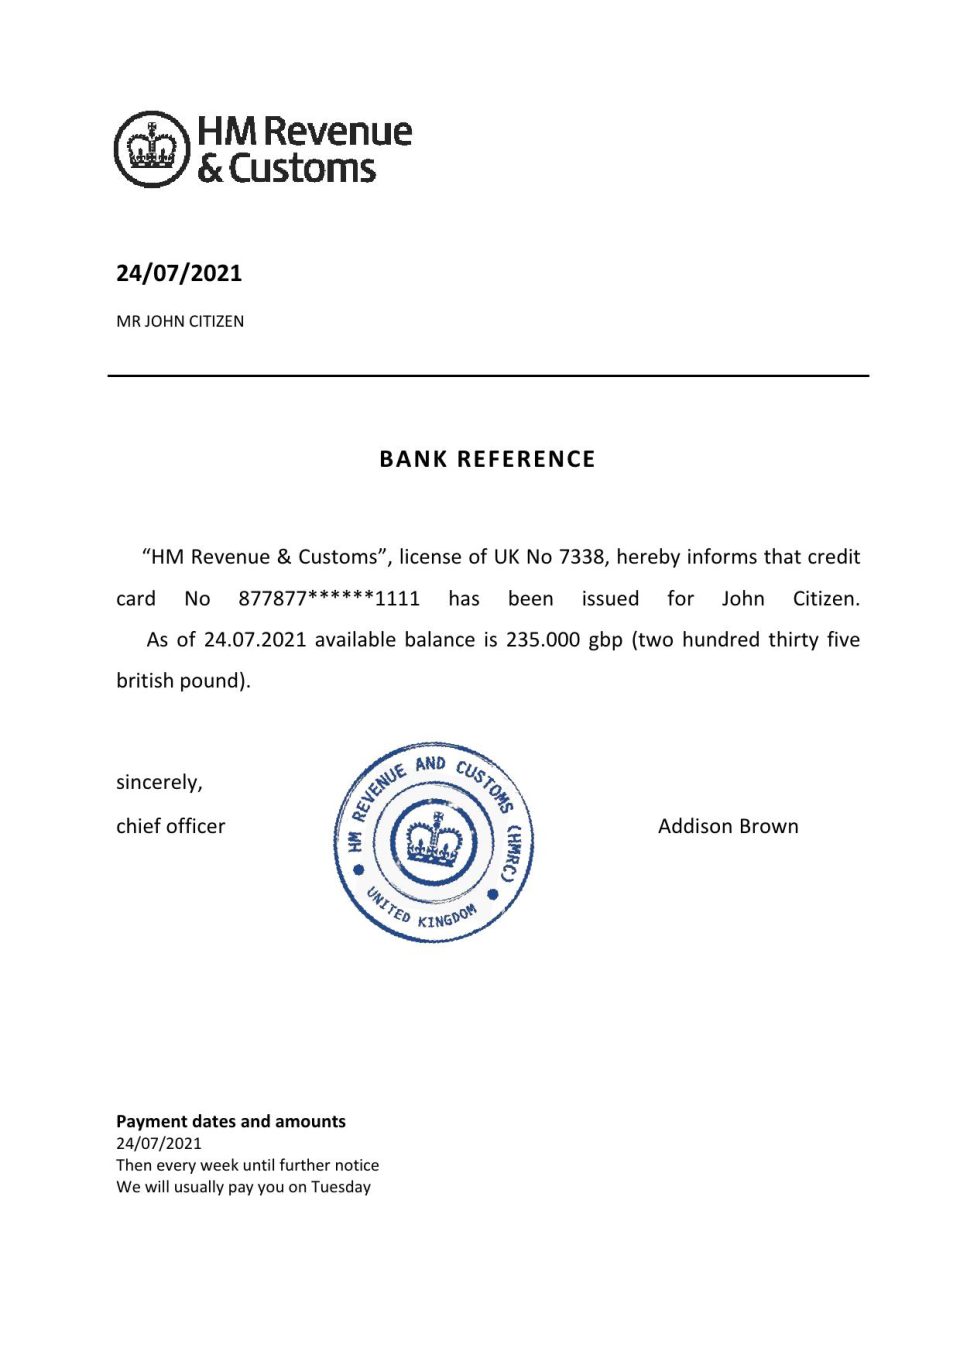 Download United Kingdom HM Revenue & Customs Bank Reference Letter Templates | Editable Word